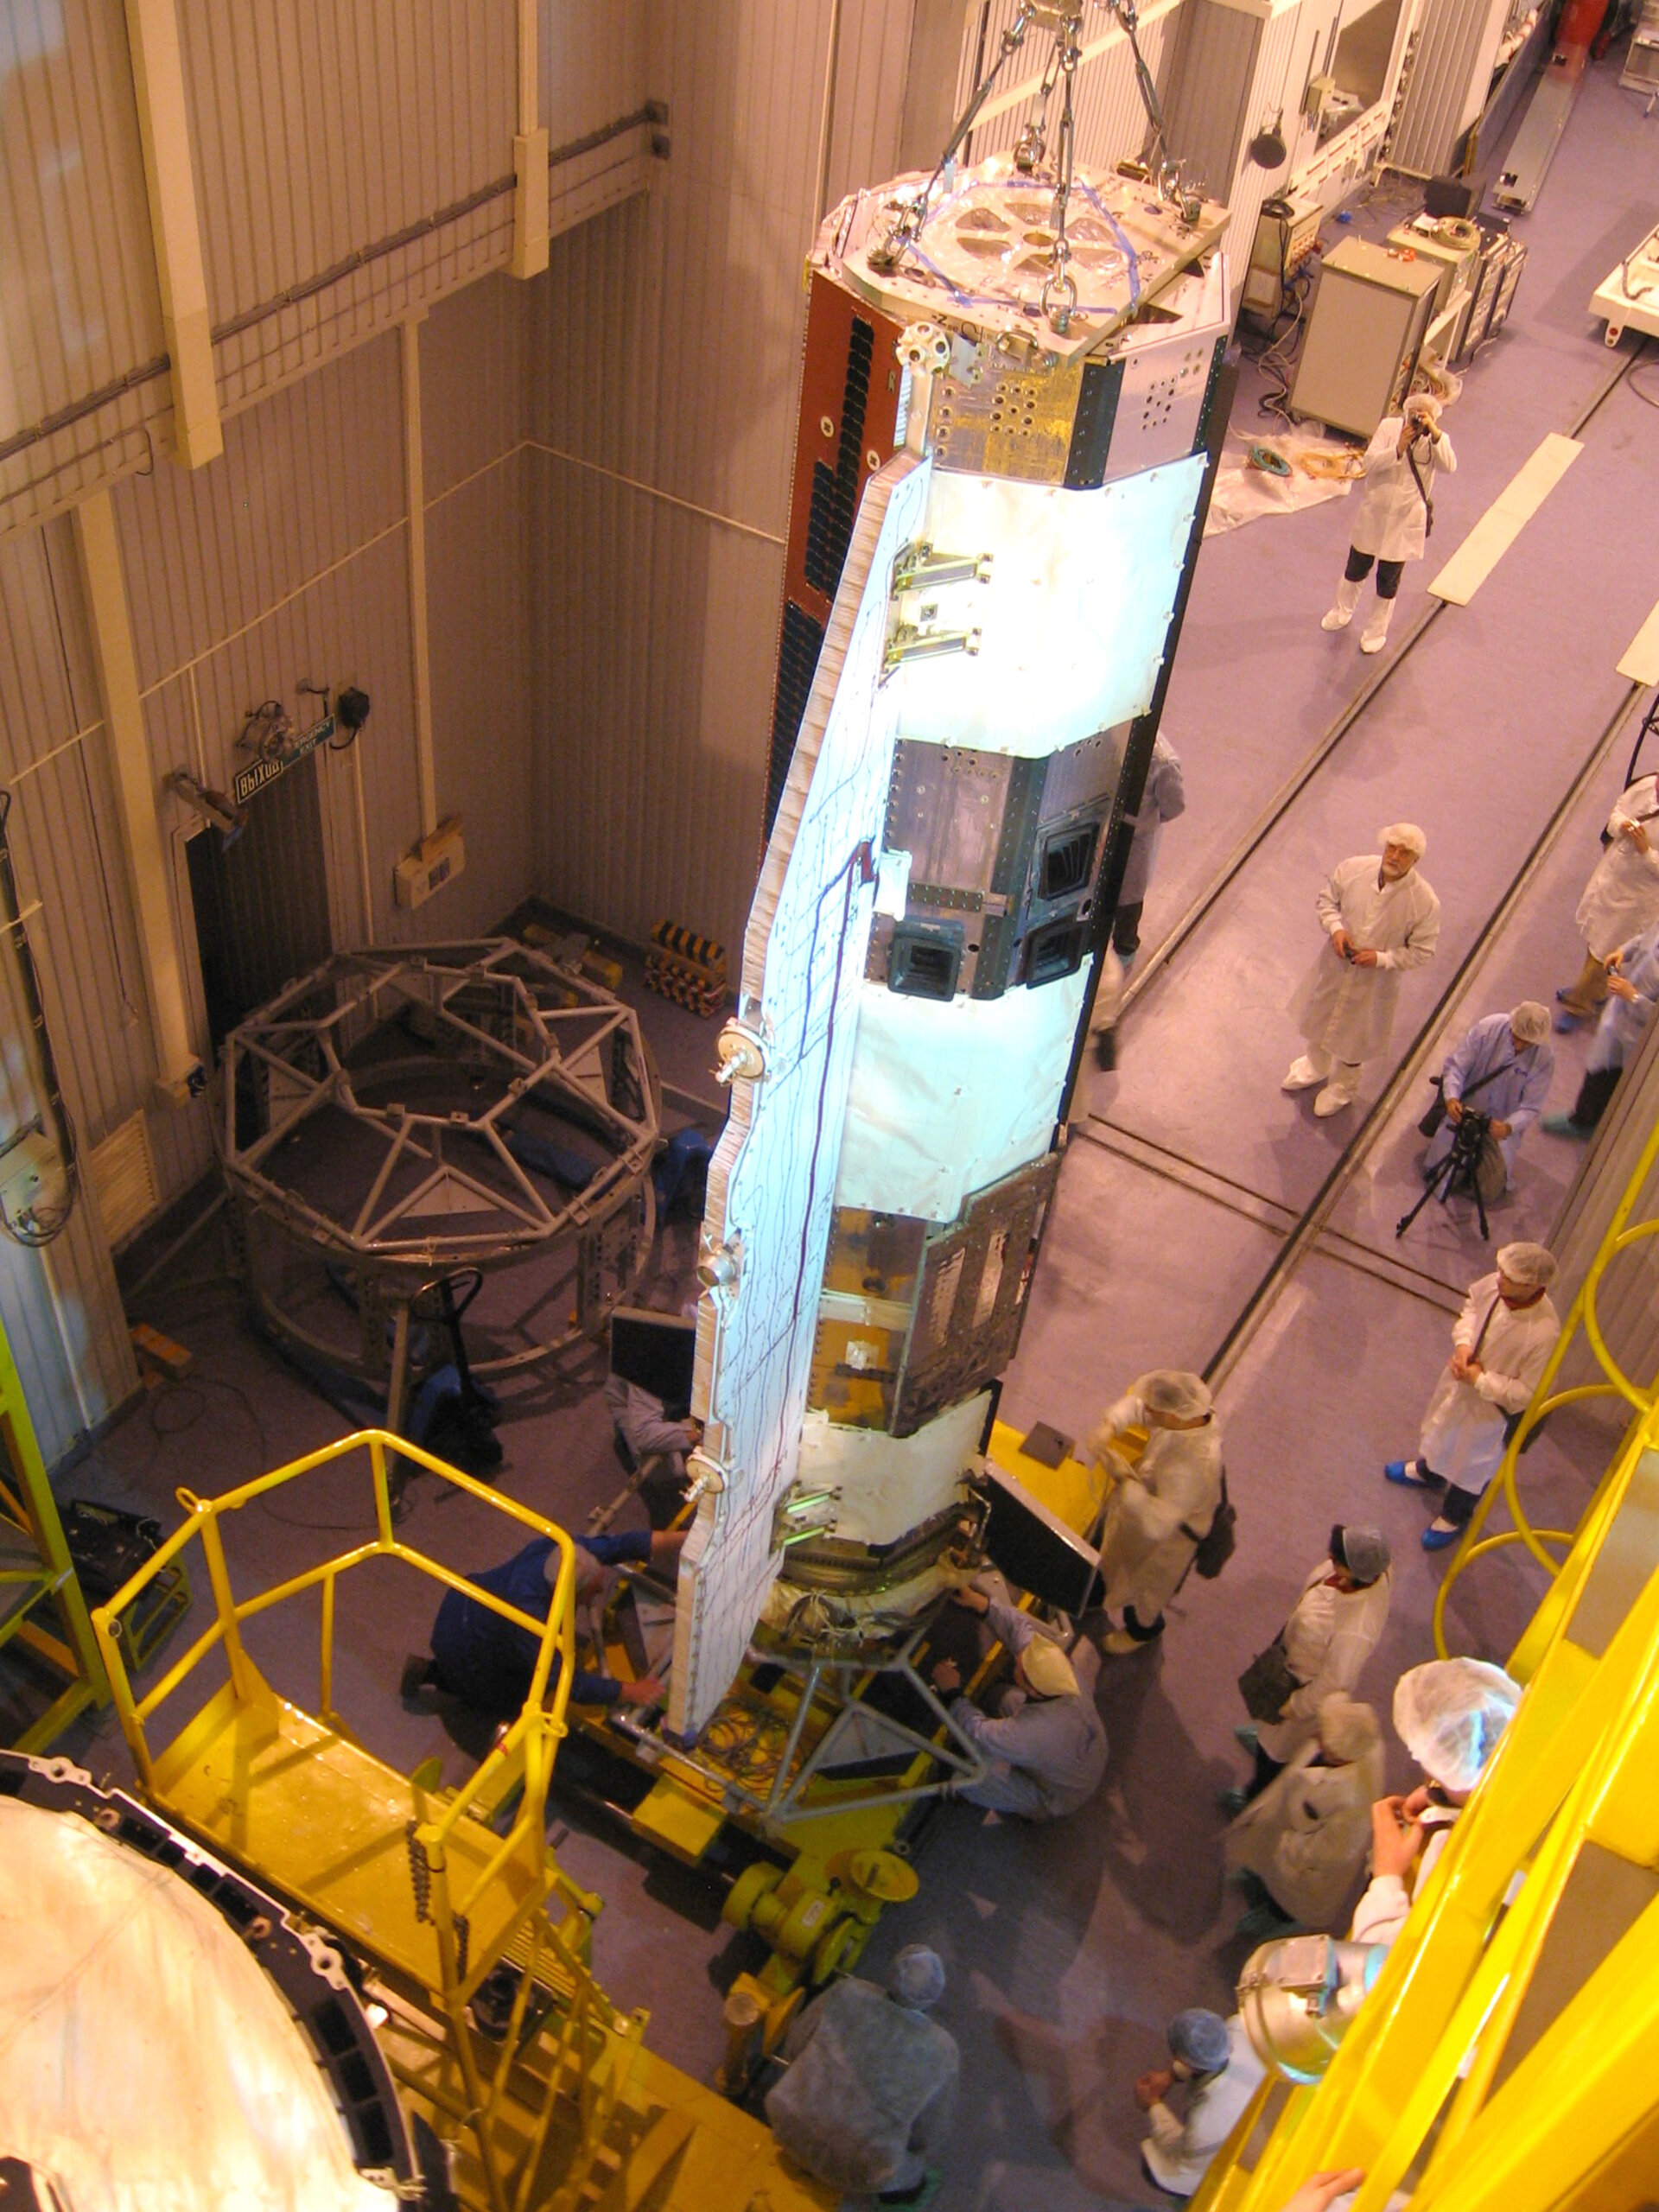 Transferring GOCE to the Upper Stage